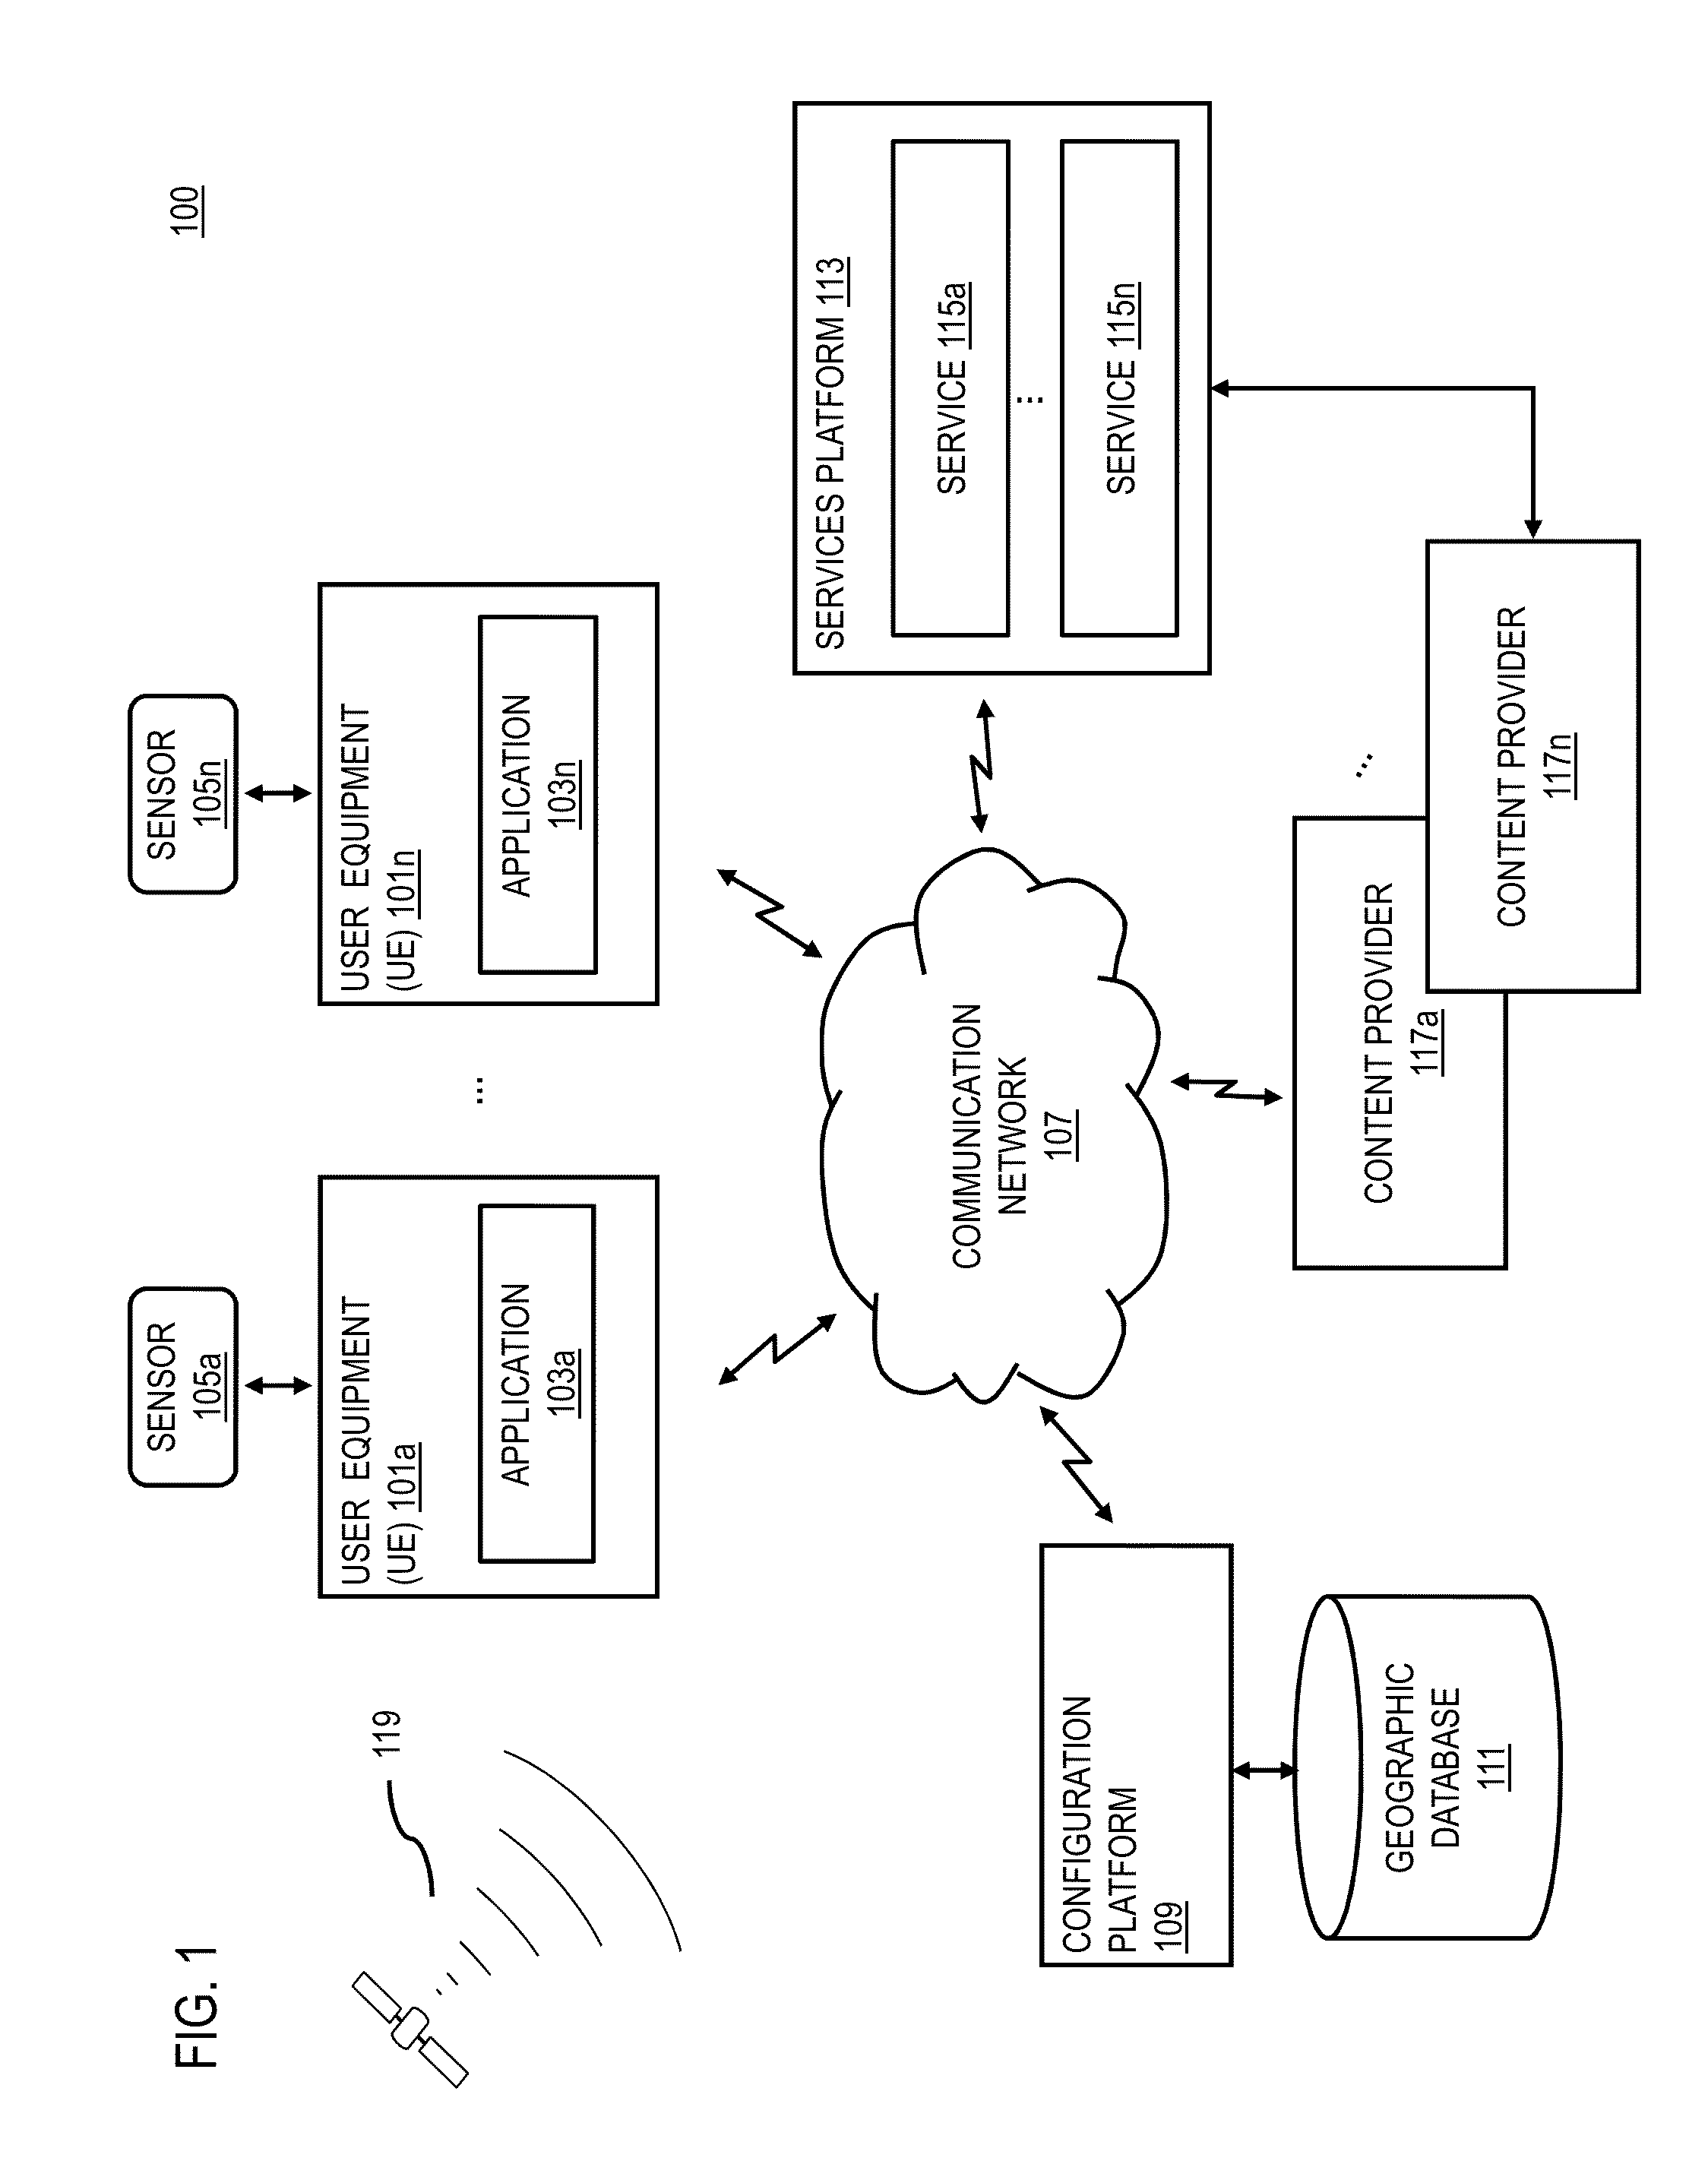 Method and apparatus for providing navigation guidance via proximate devices